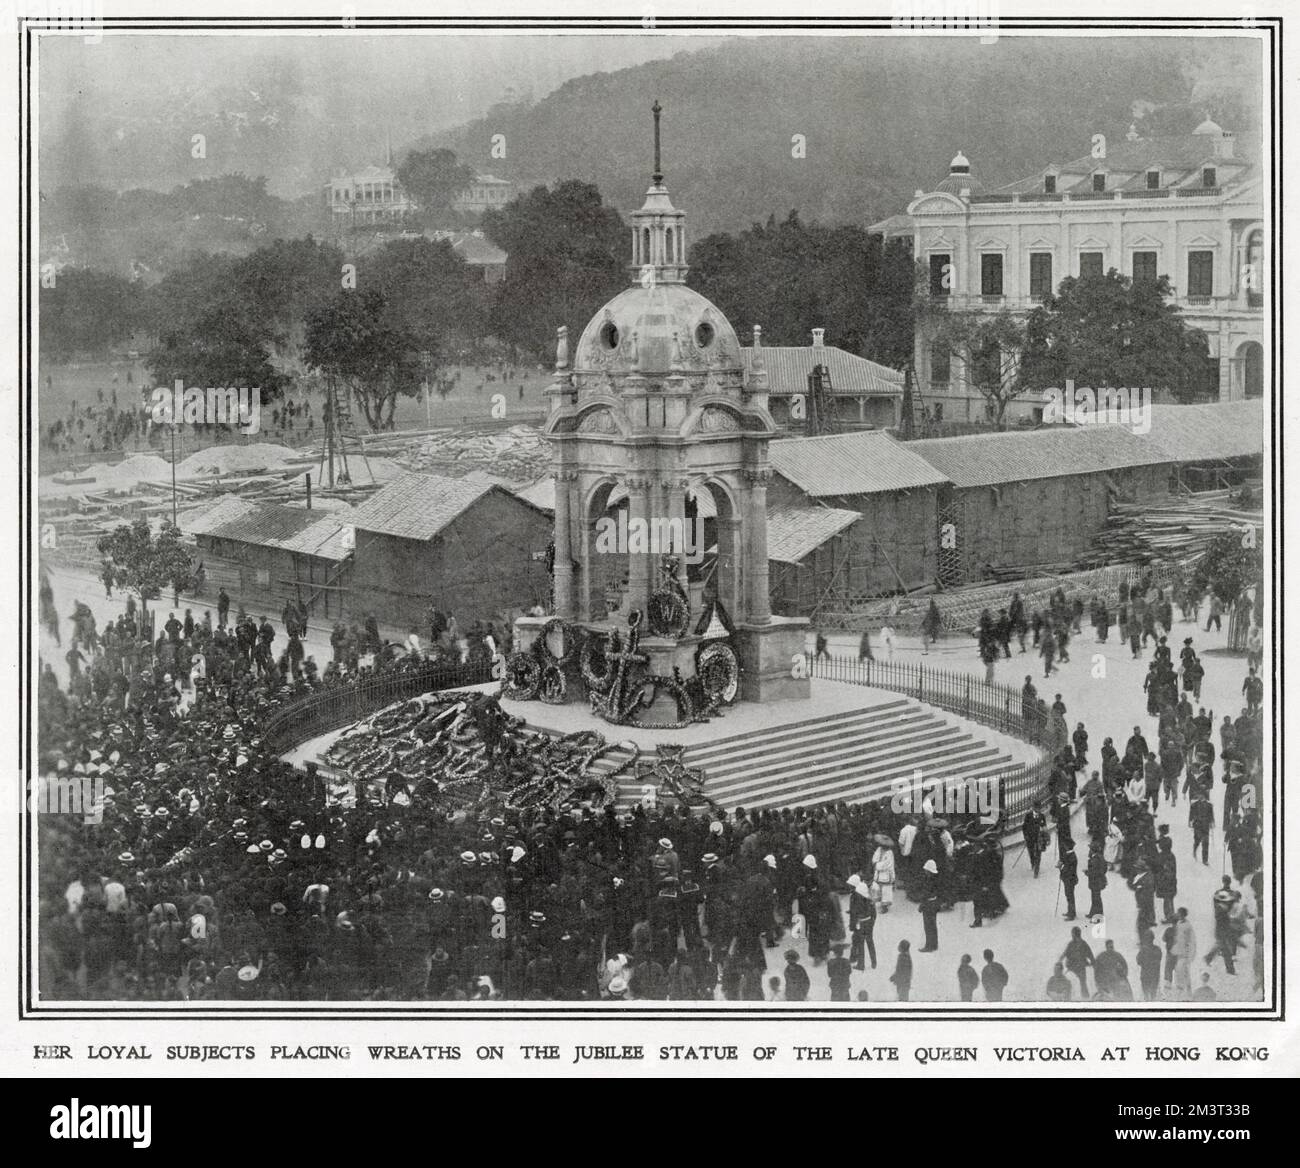 Loyal subjects placing wreaths on the Jubilee Monument at Hong Kong, after the death of Queen Victoria. Stock Photo